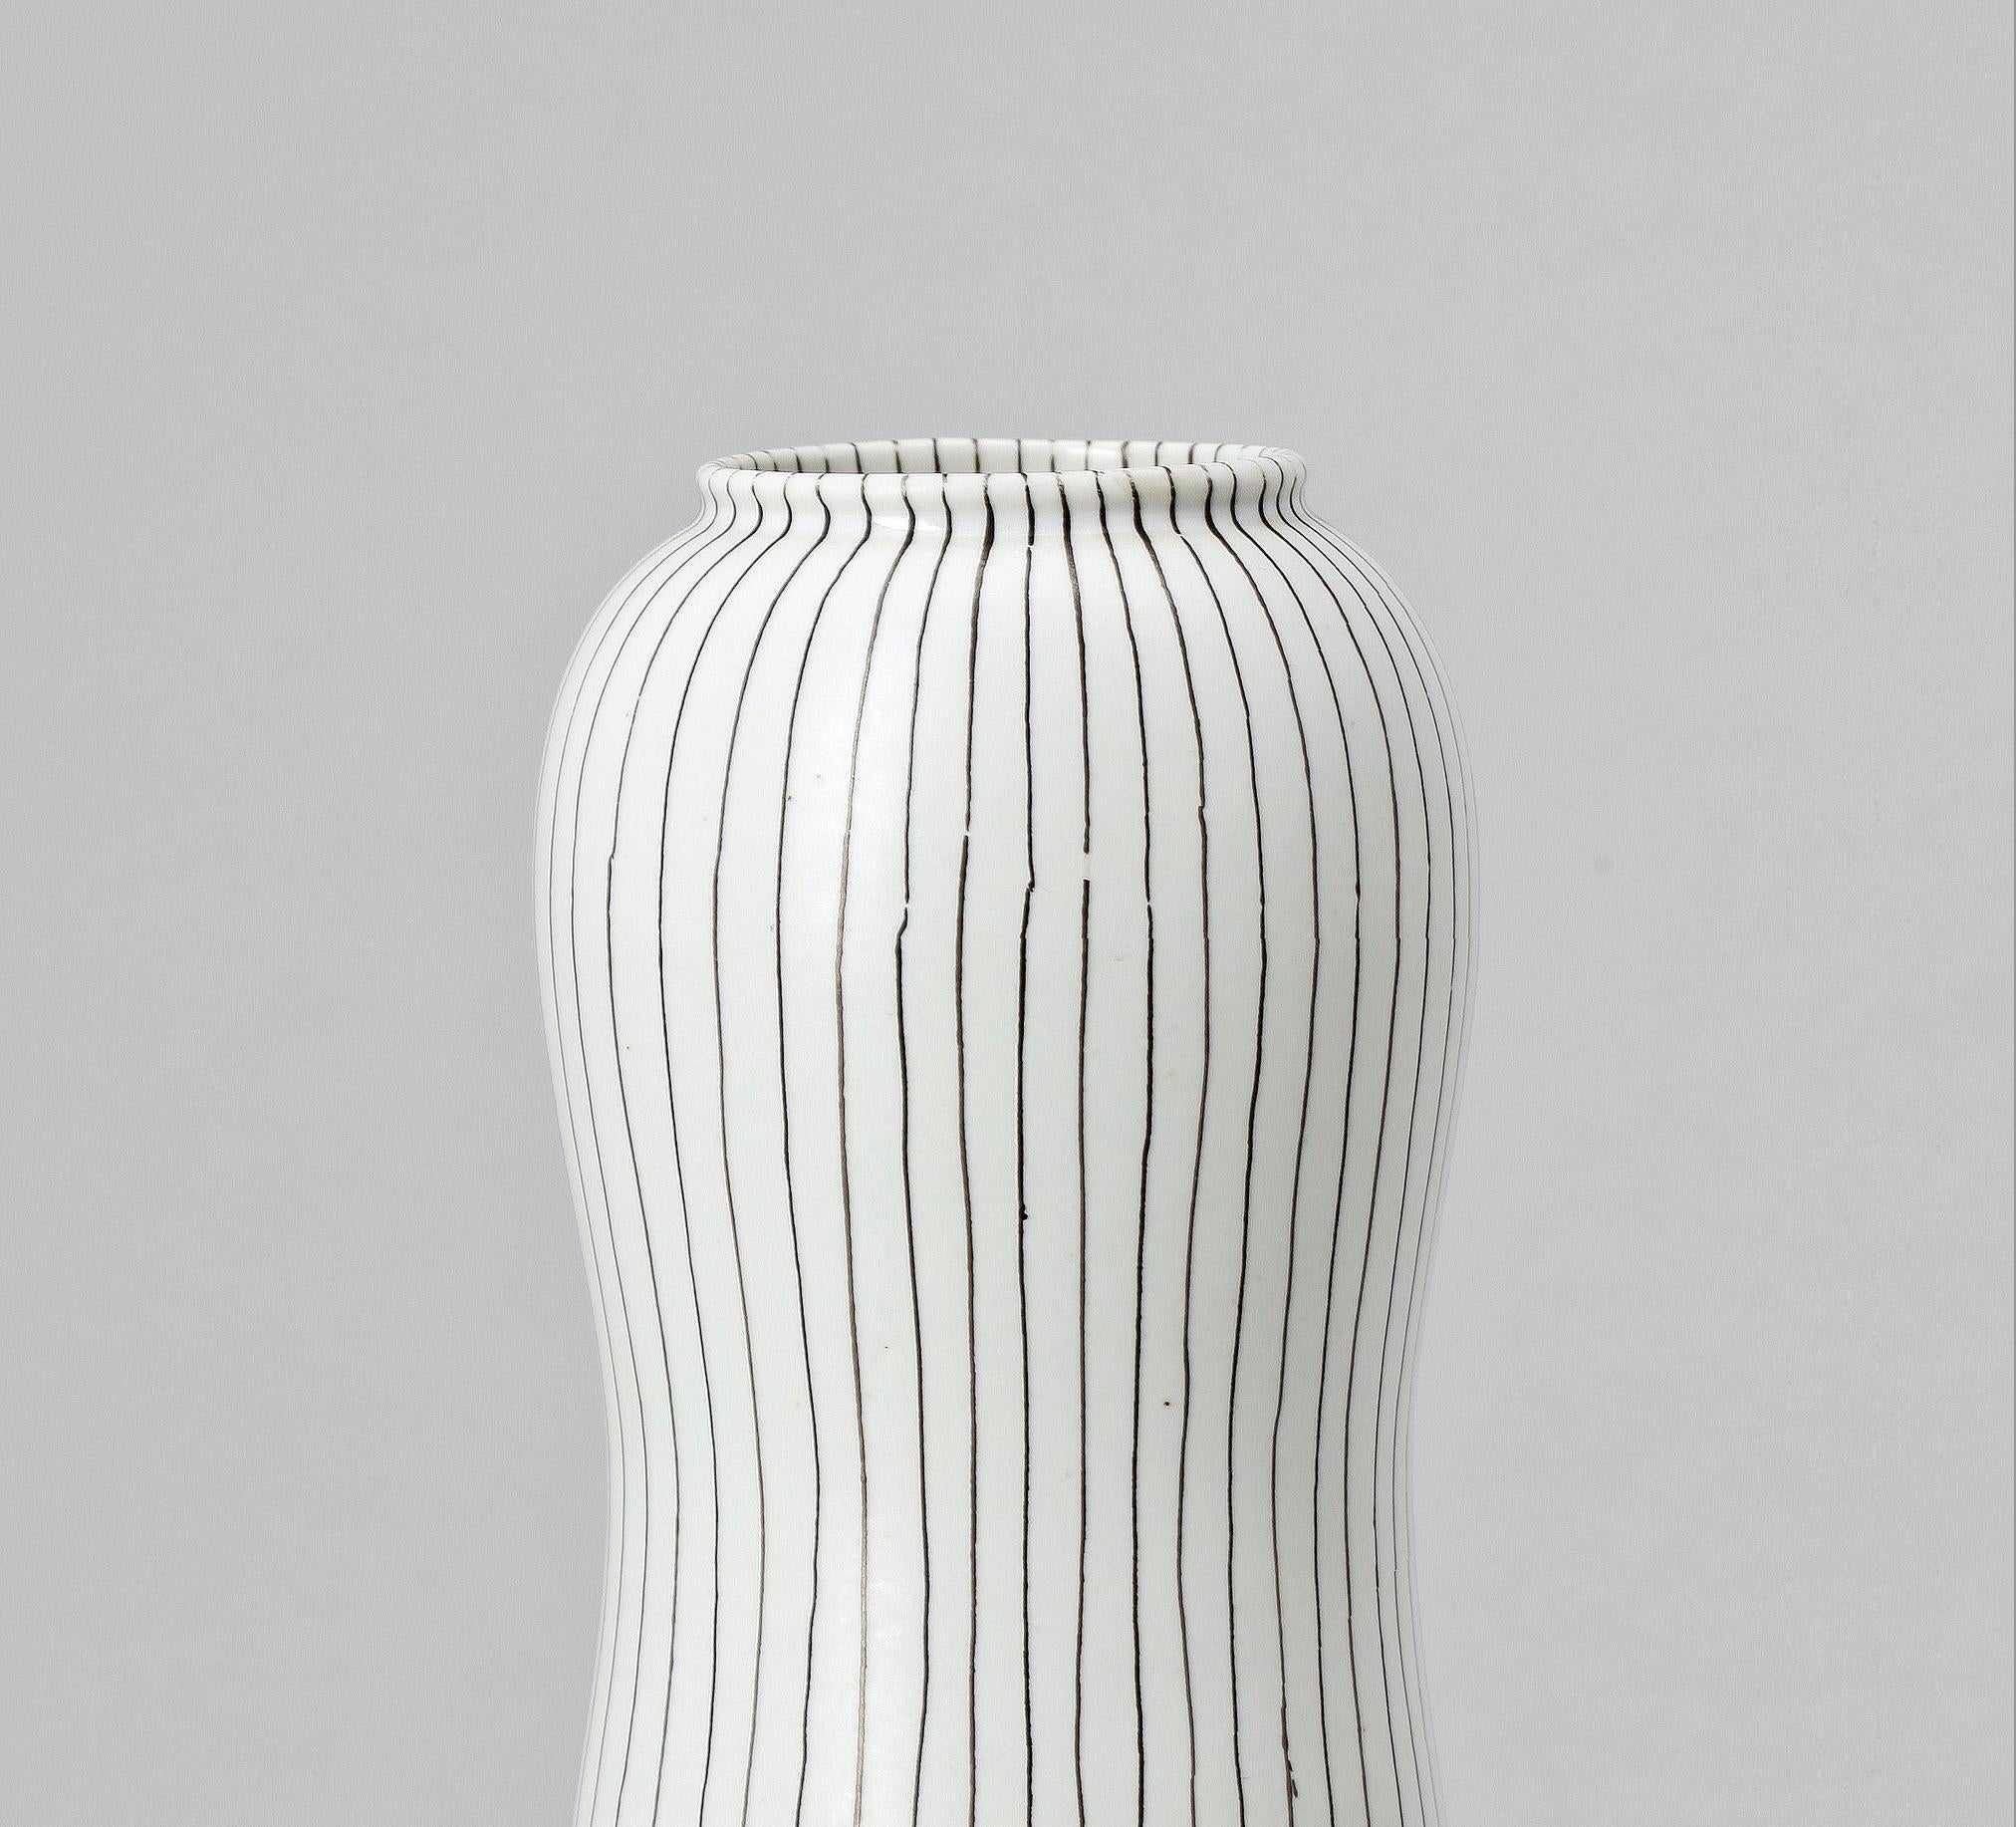 Stig Lindberg (1951) Filigran vase for Gustavsberg Ceramic and silver 
Stig Lindberg’s ”Filigran” (Filigree) series was designed in 1951 during the golden era of Swedish pottery. The works of art were made of stoneware with streamlined shapes,